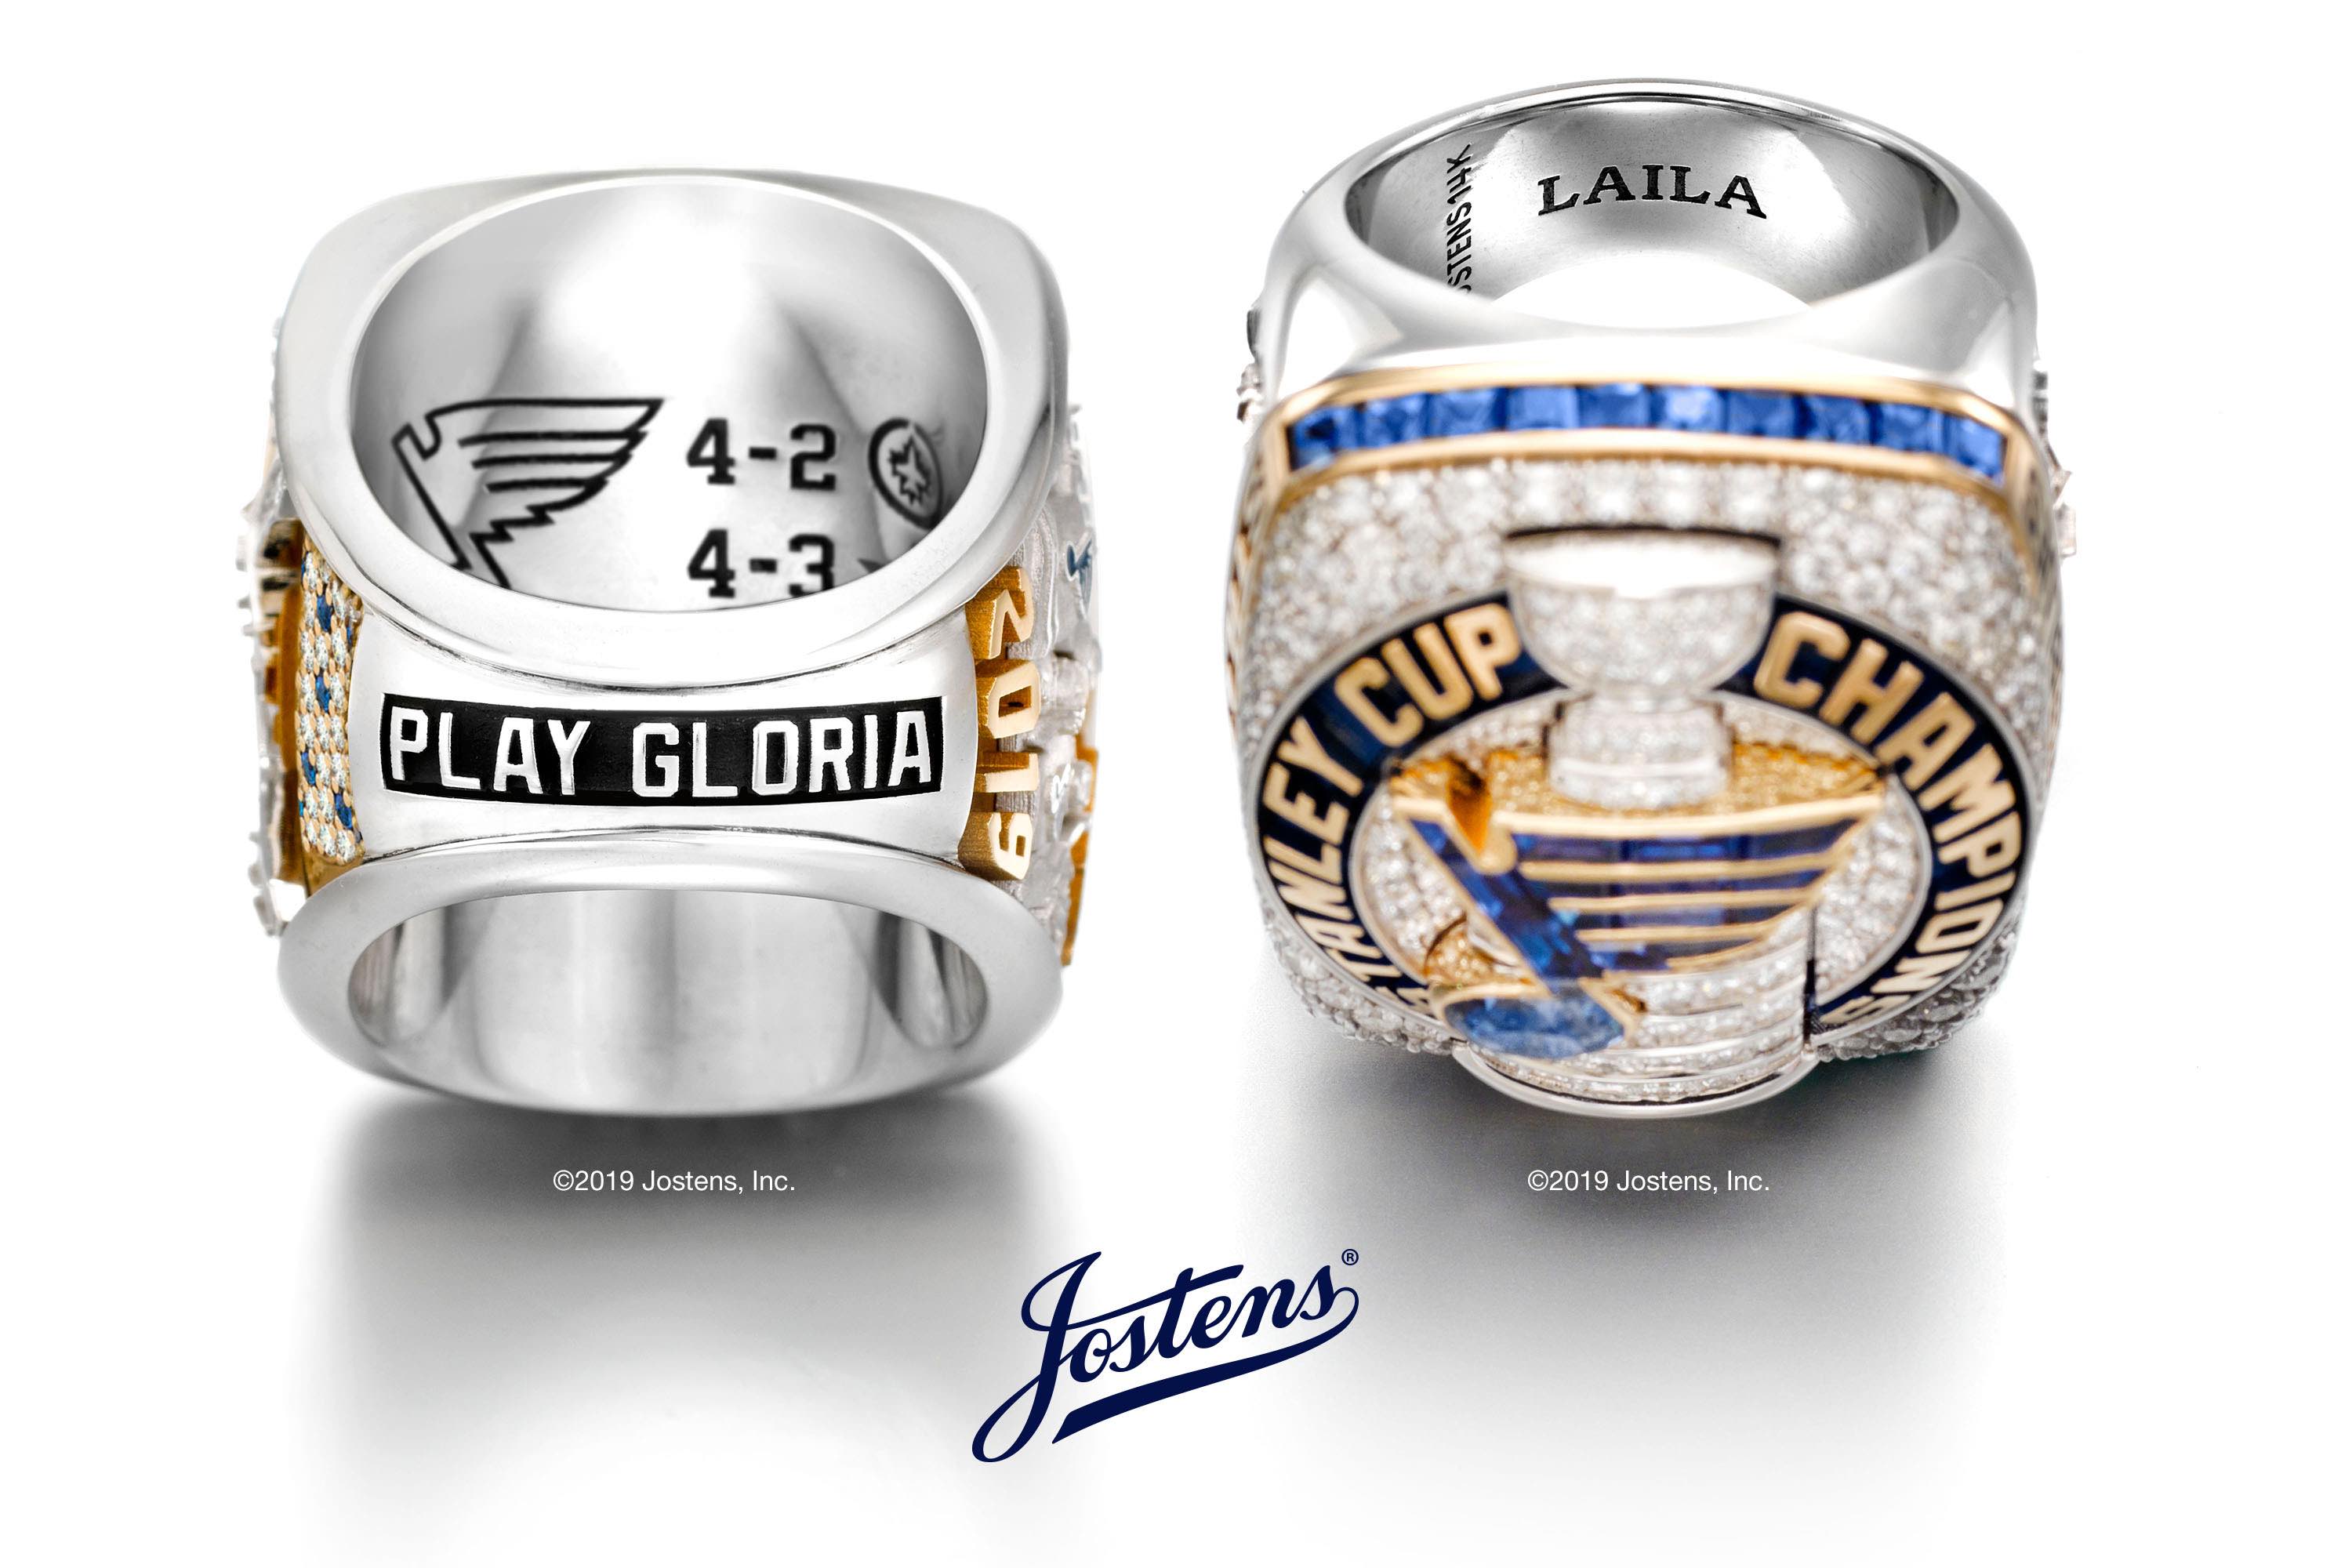 Inside ring detail of St. Louis Blues 2019 Stanley Cup Championship Ring, designed by Jostens.